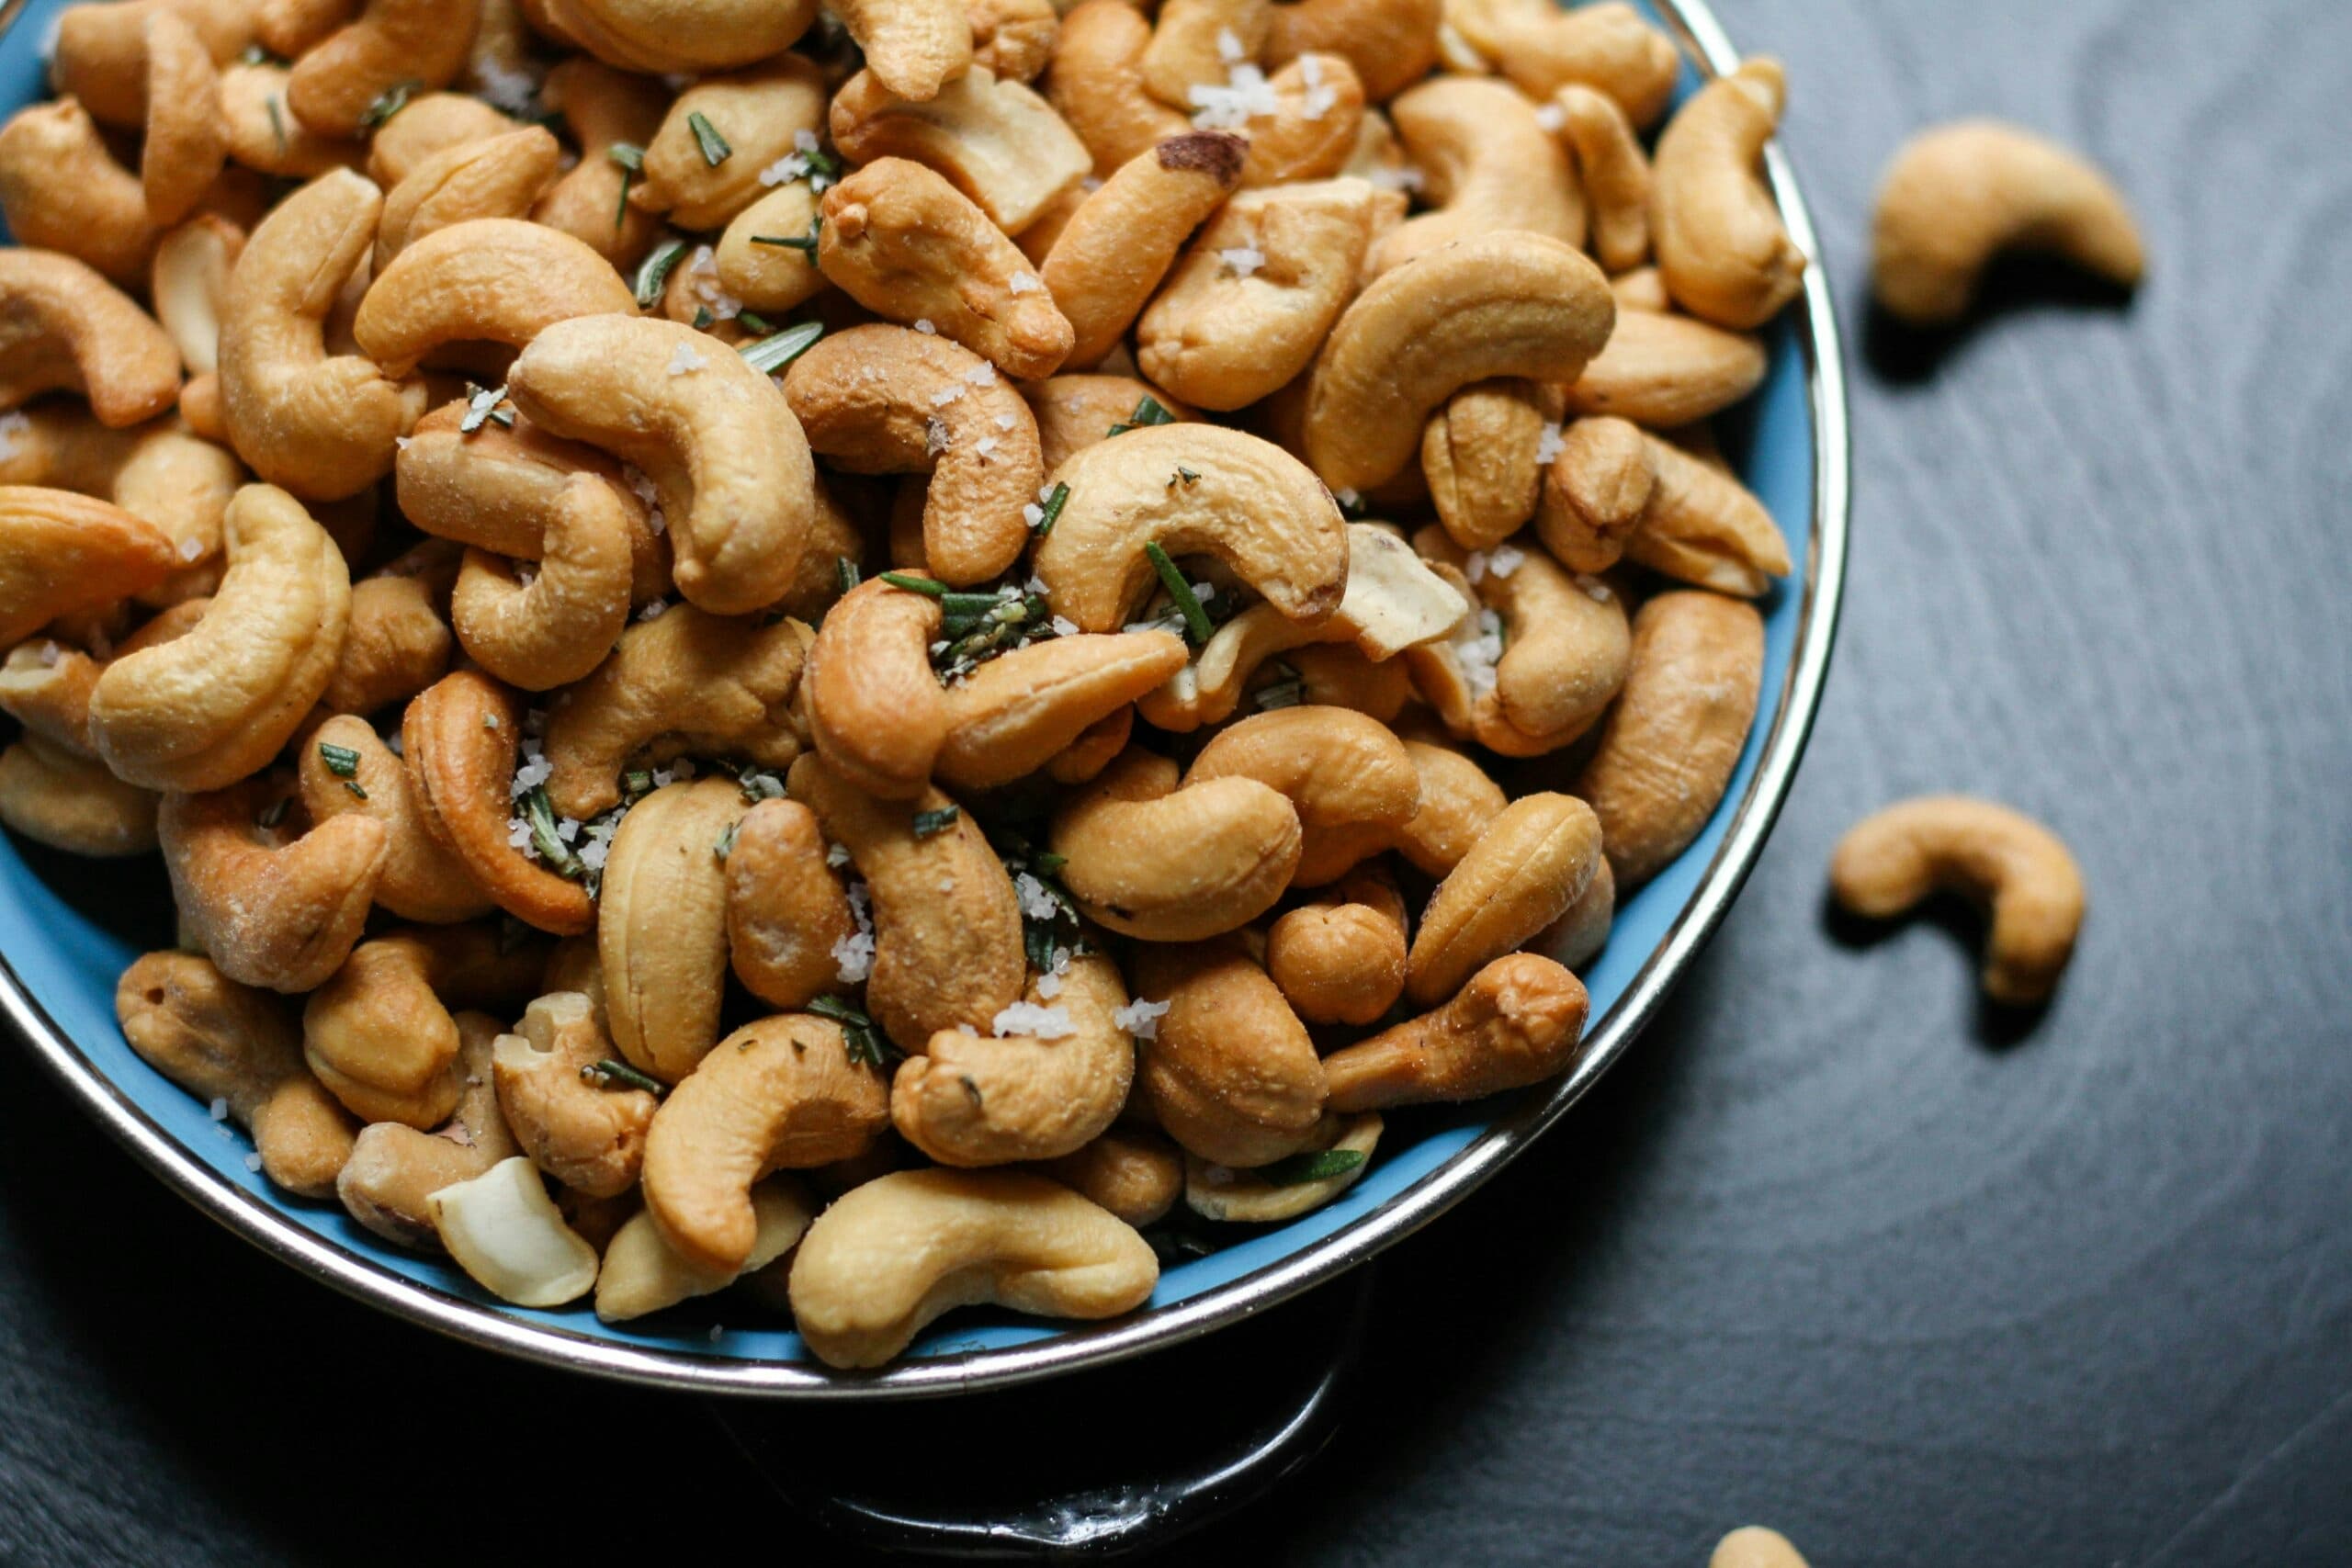 Taming the respiration and biological activity of cashews